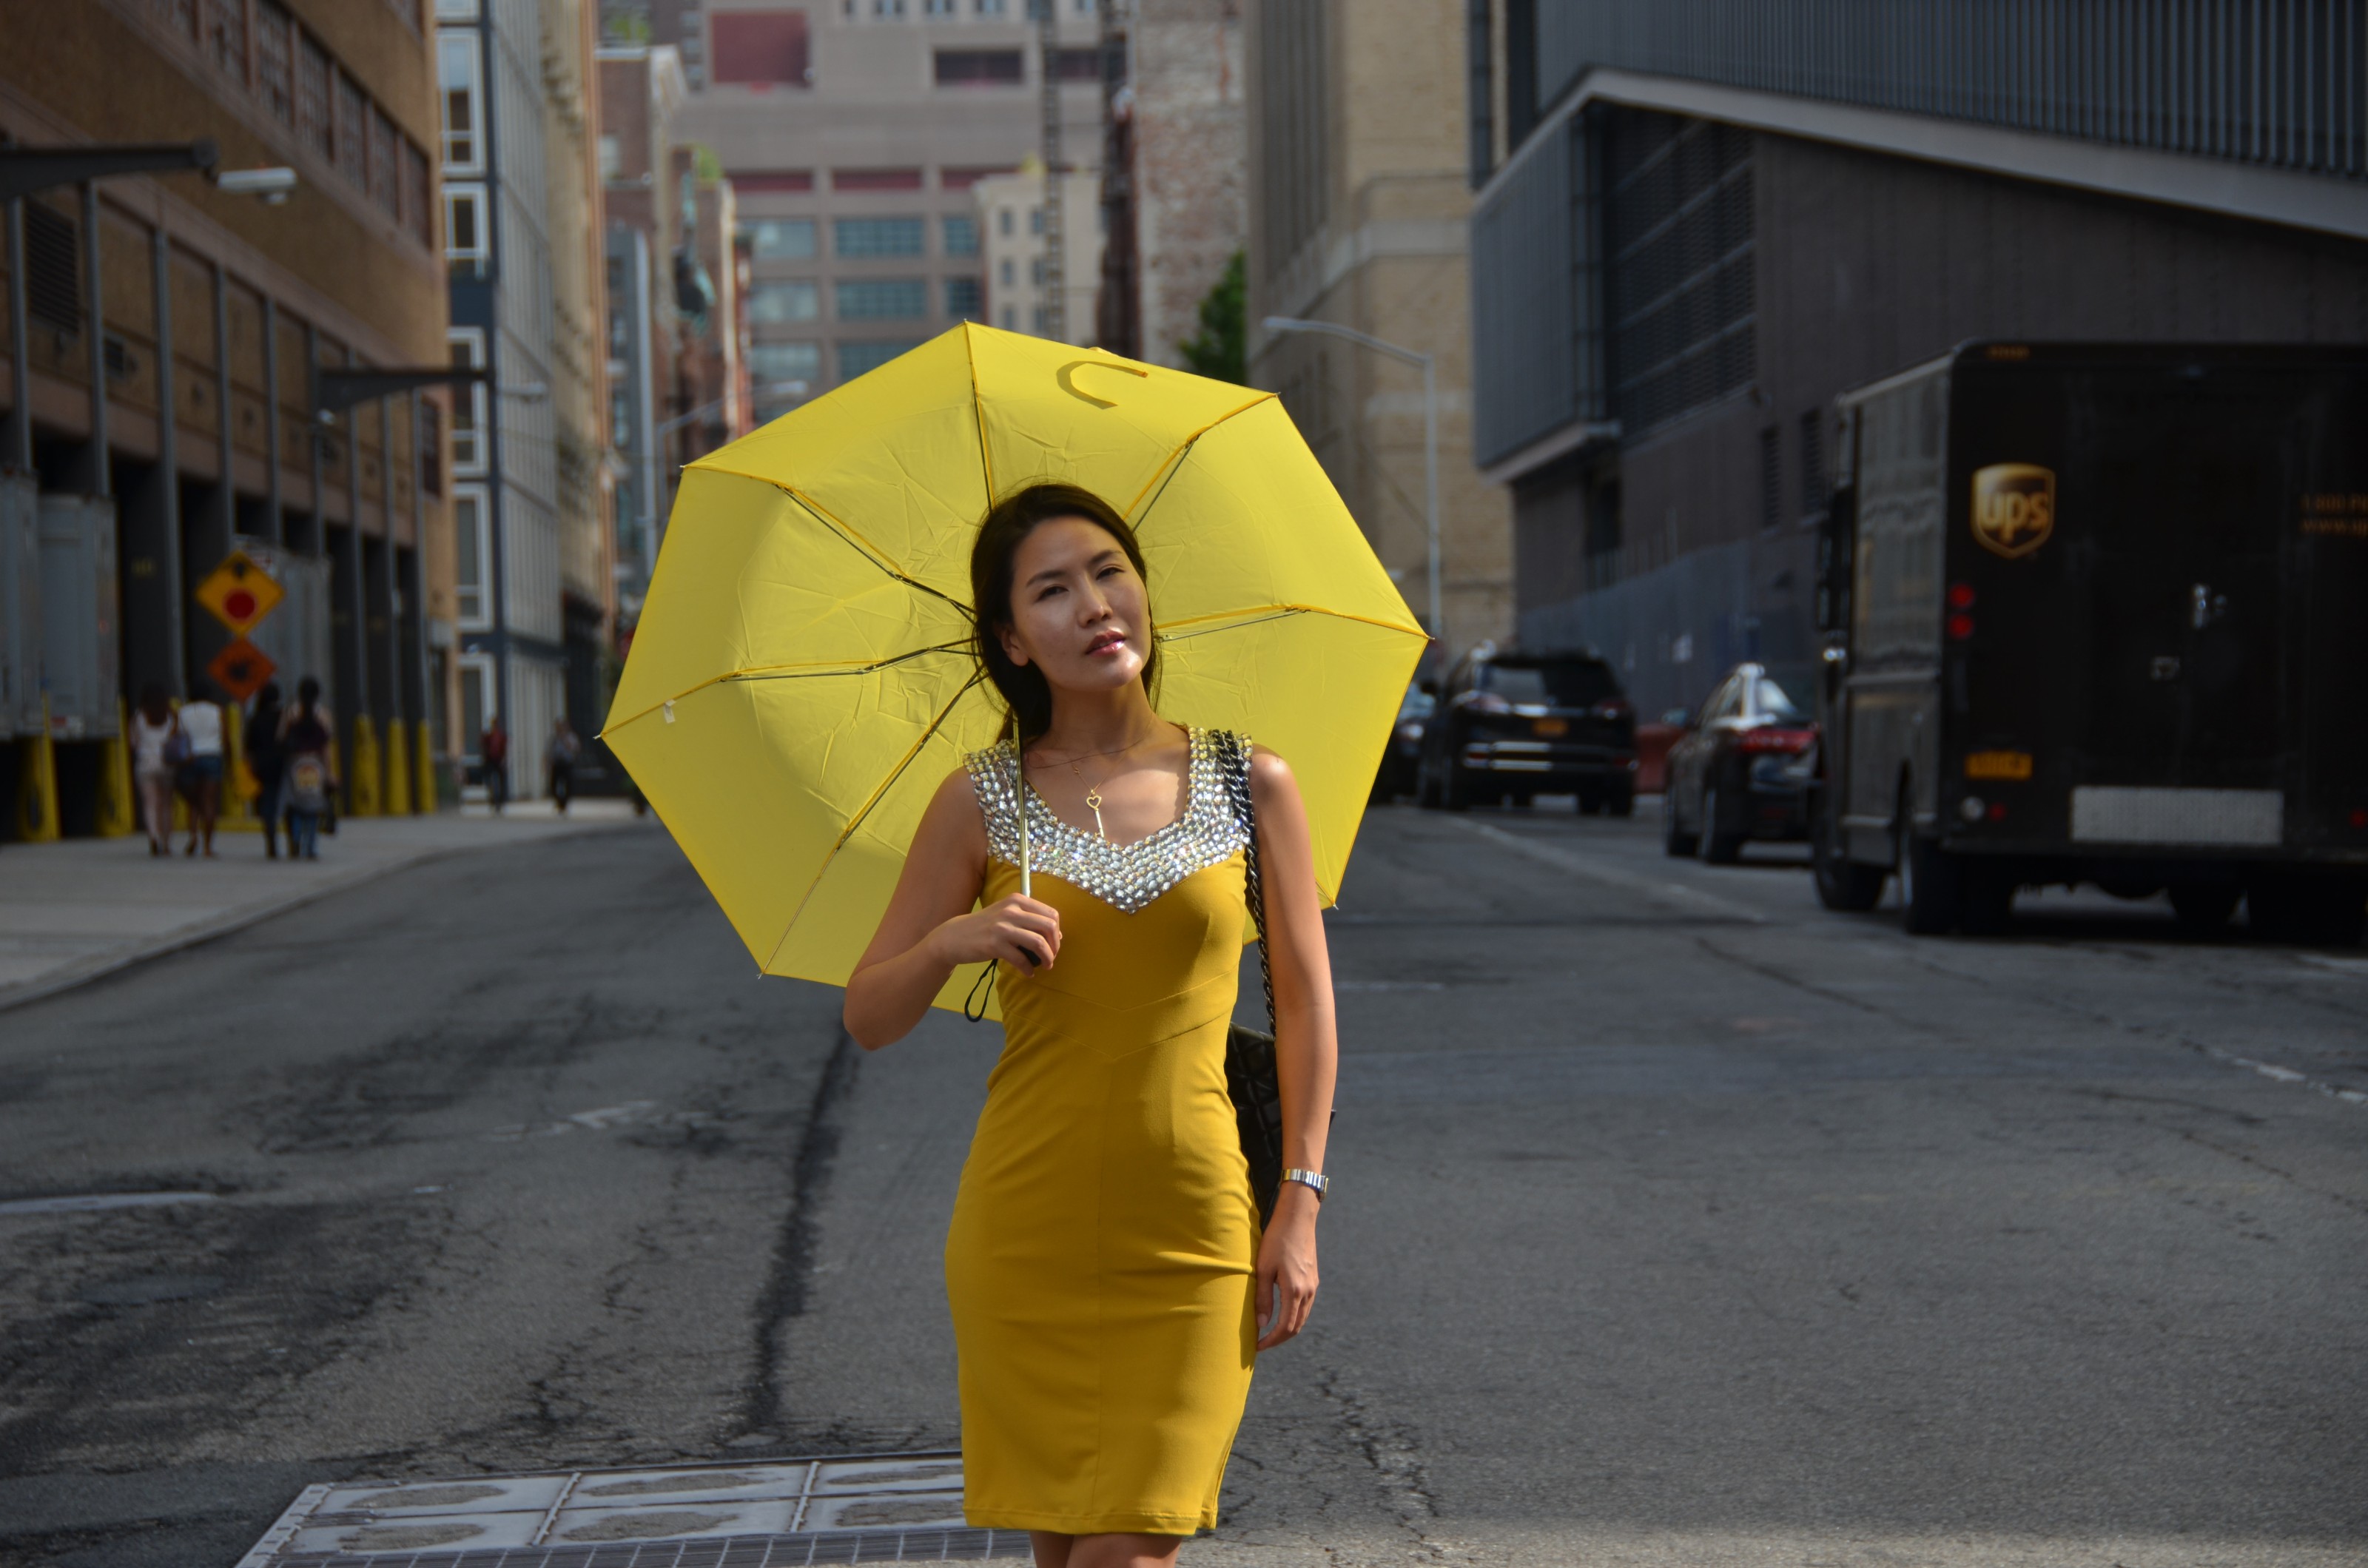 girl in yellow dress and umbrella on city street